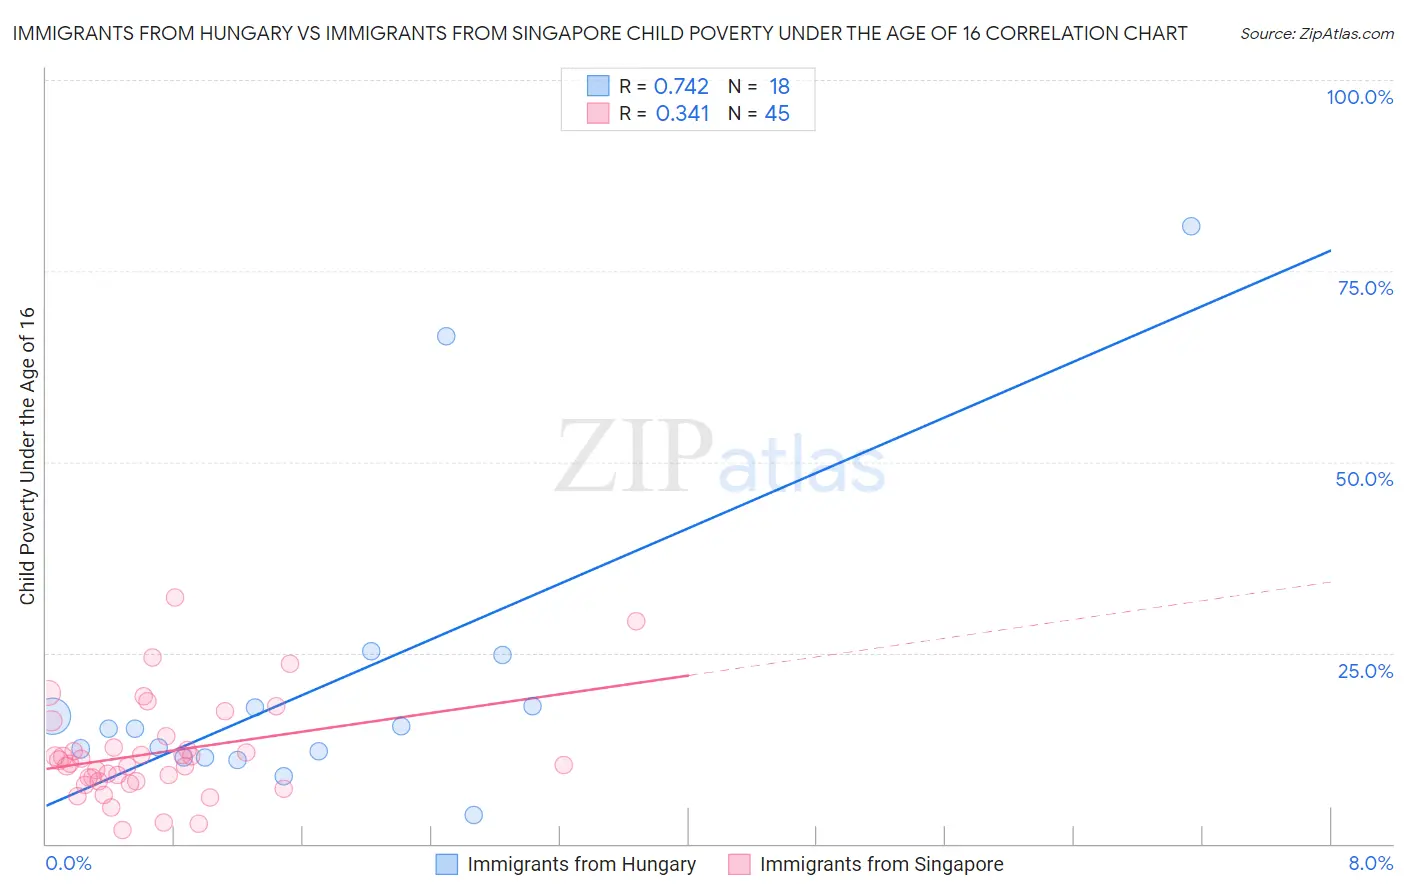 Immigrants from Hungary vs Immigrants from Singapore Child Poverty Under the Age of 16